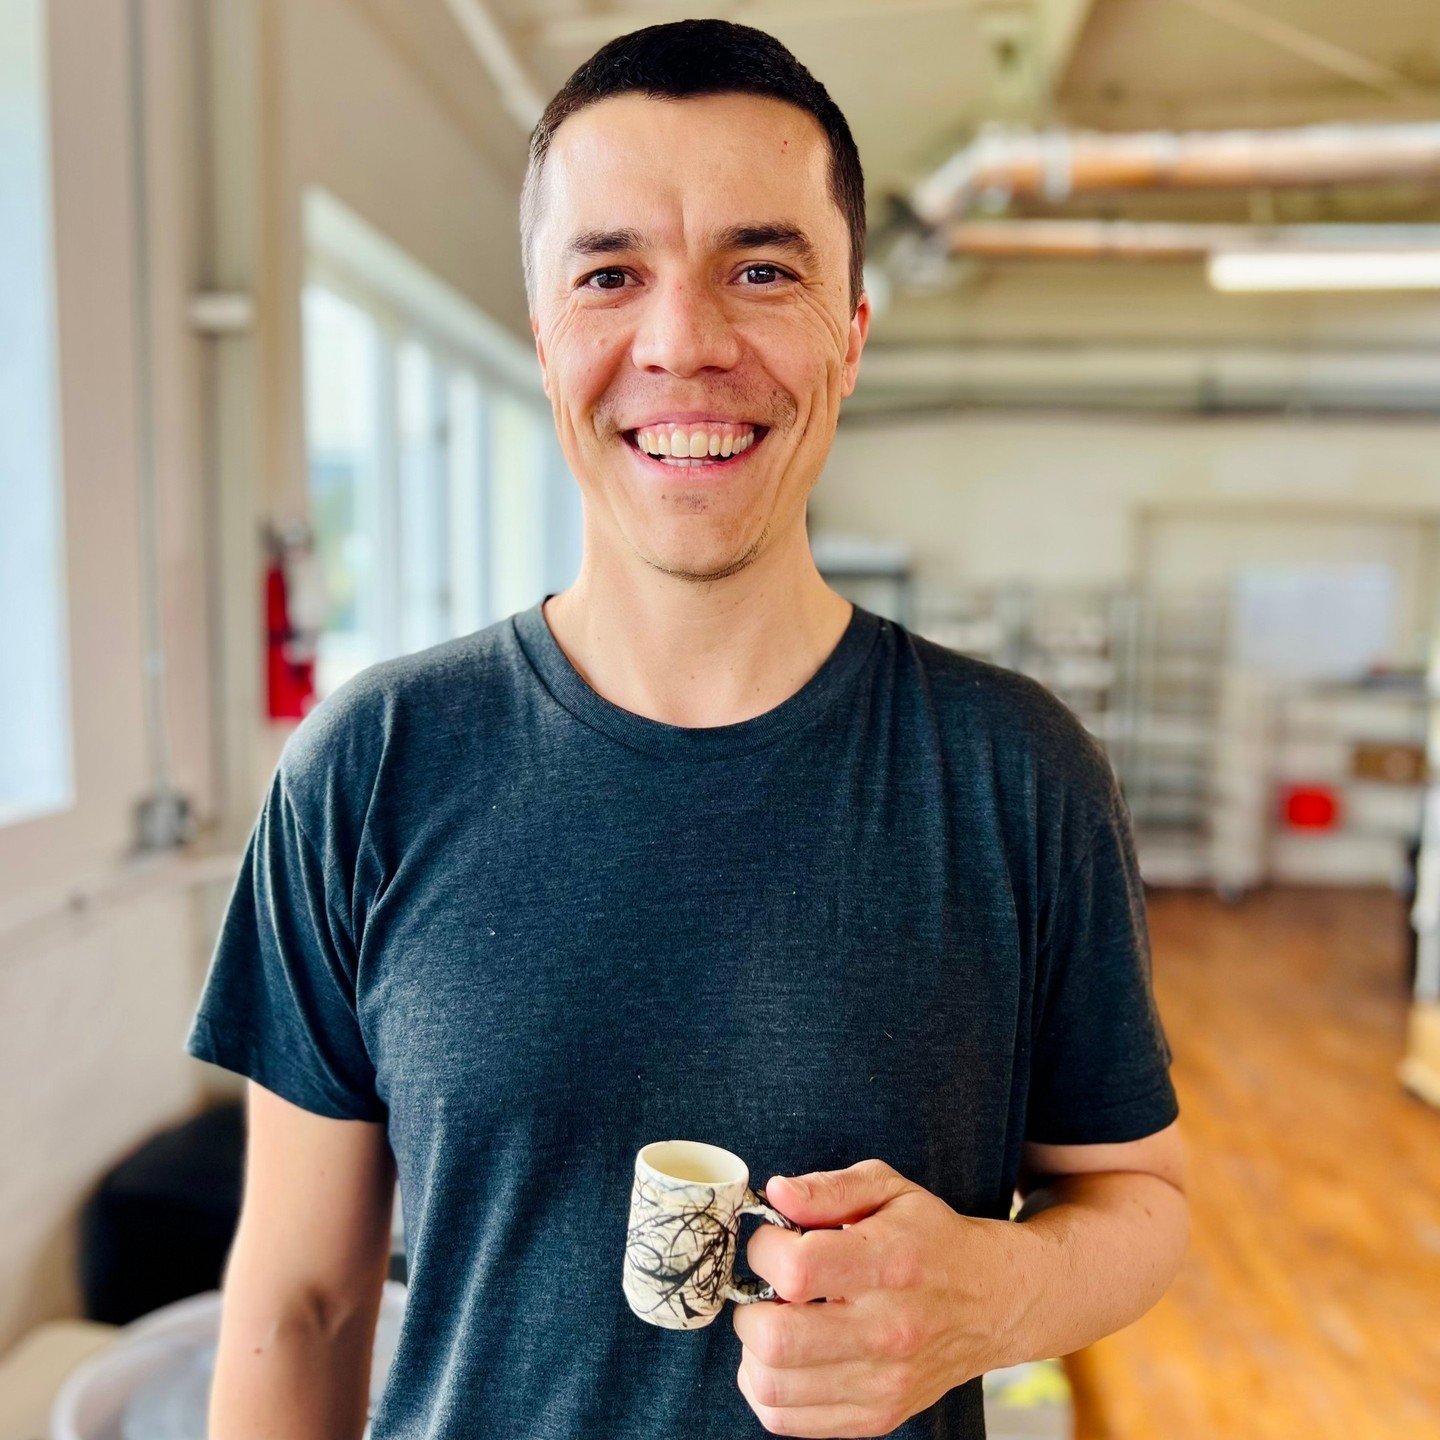 Sean (@Bikeula), one of our Members, has been making a series of tiny cups and bowls, and they are stunning! Check this one out, with this striking design, done with a string soaked in underglaze. ⁠
⁠
#texturalceramics #minicup #unexpectedmaterials #